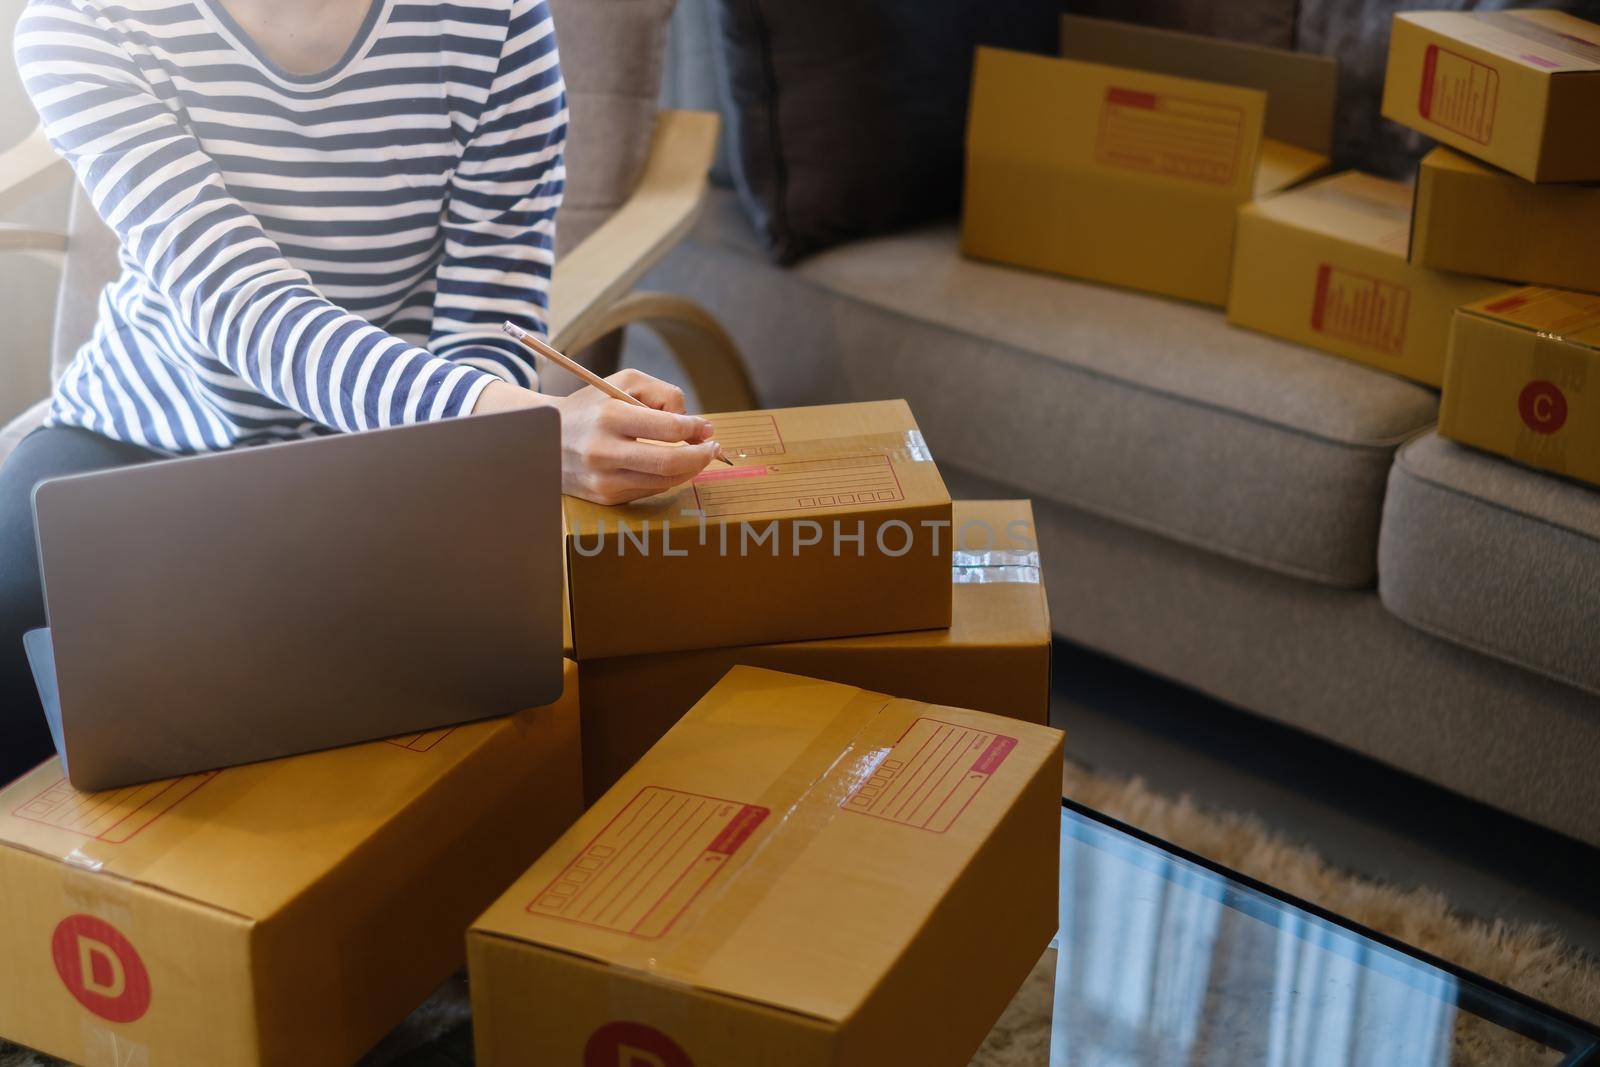 Asian small business owner working at home office. Business retail market and online sell marketing delivery, SME e-commerce concept by itchaznong